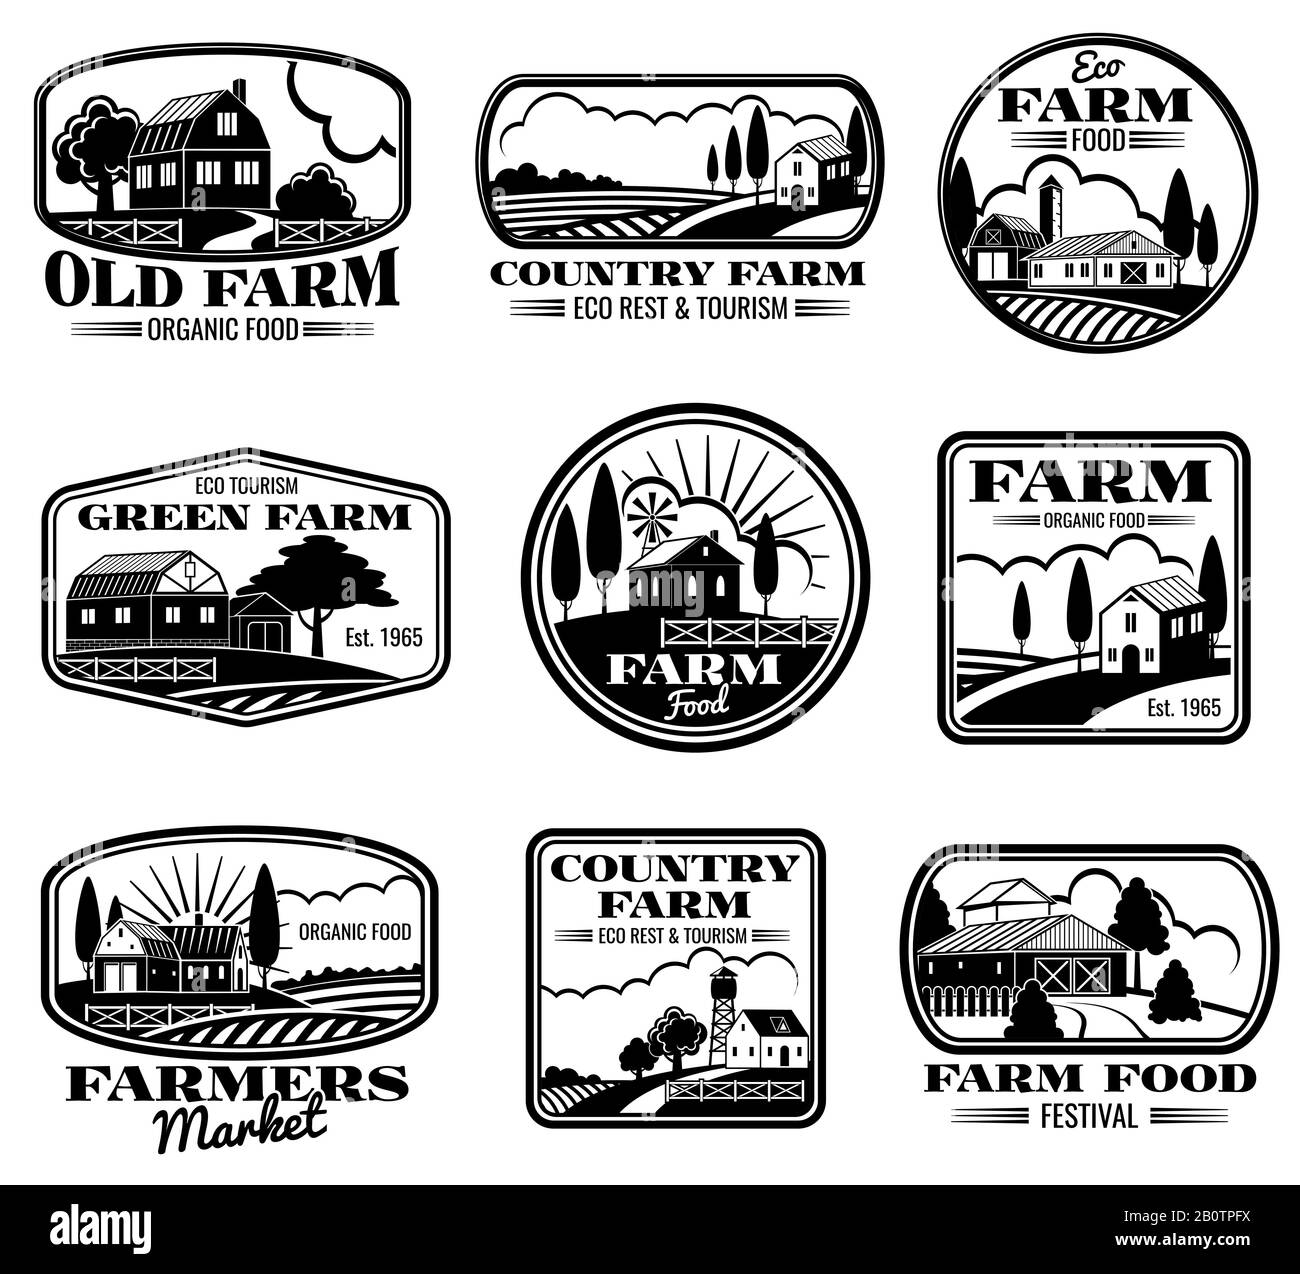 Vintage farm marketing vector logos and labels set. Eco farm and country farm production illustration Stock Vector